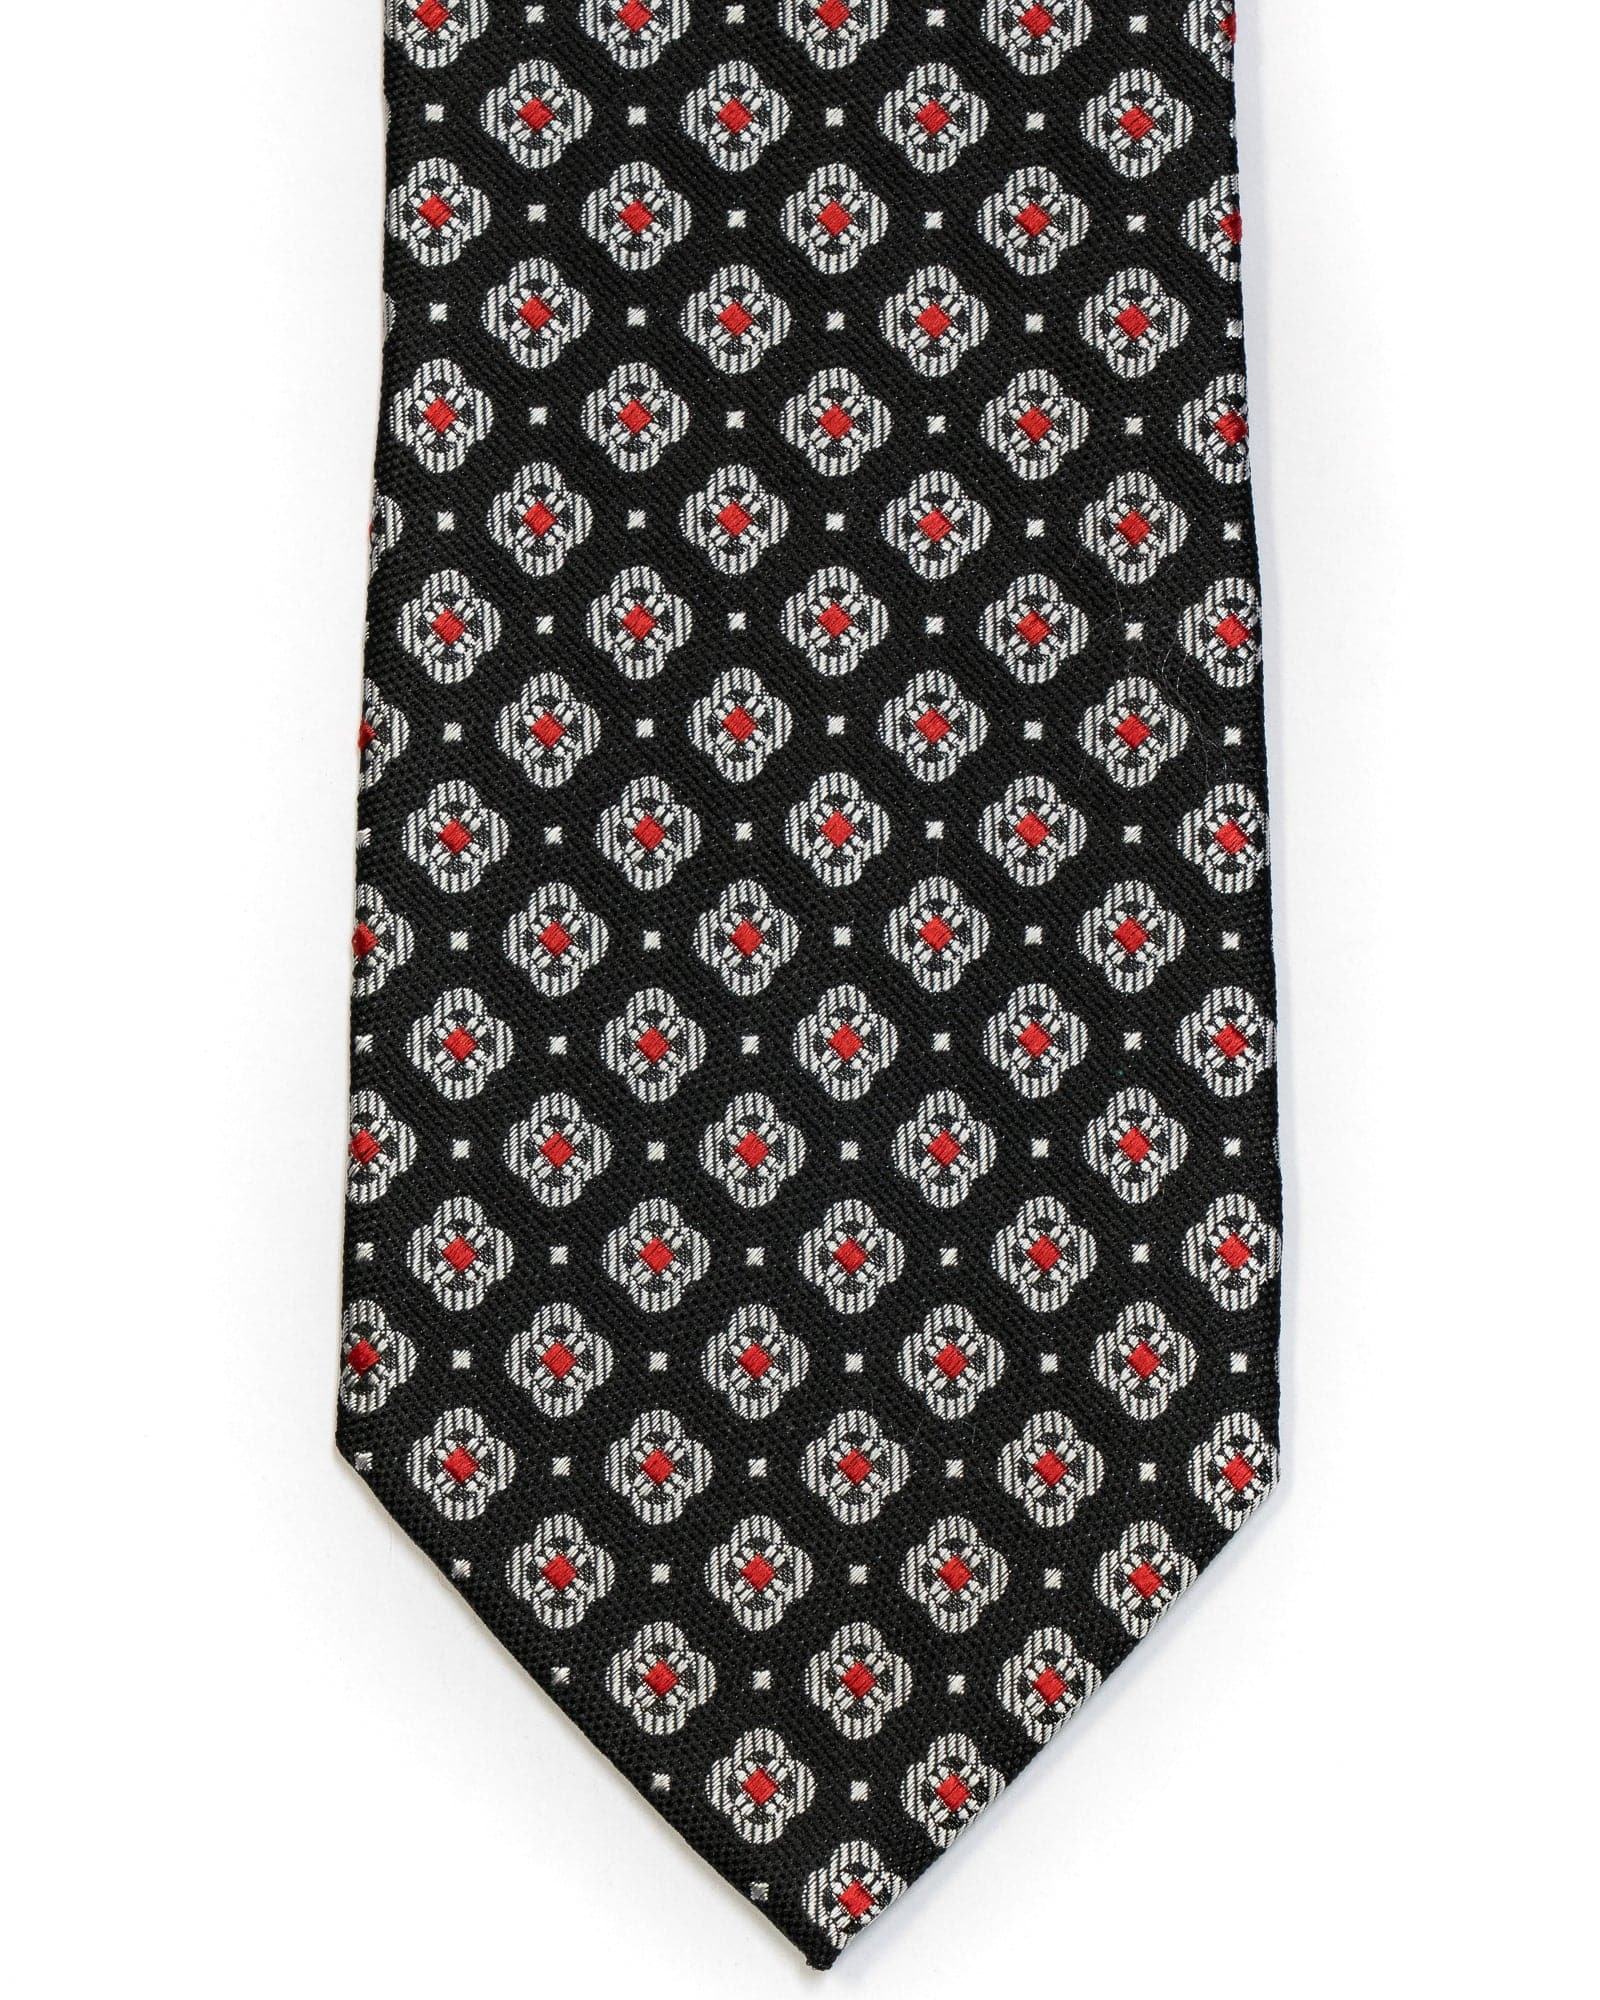 Silk Tie In Black With Grey & Red Foulard Design - Rainwater's Men's Clothing and Tuxedo Rental